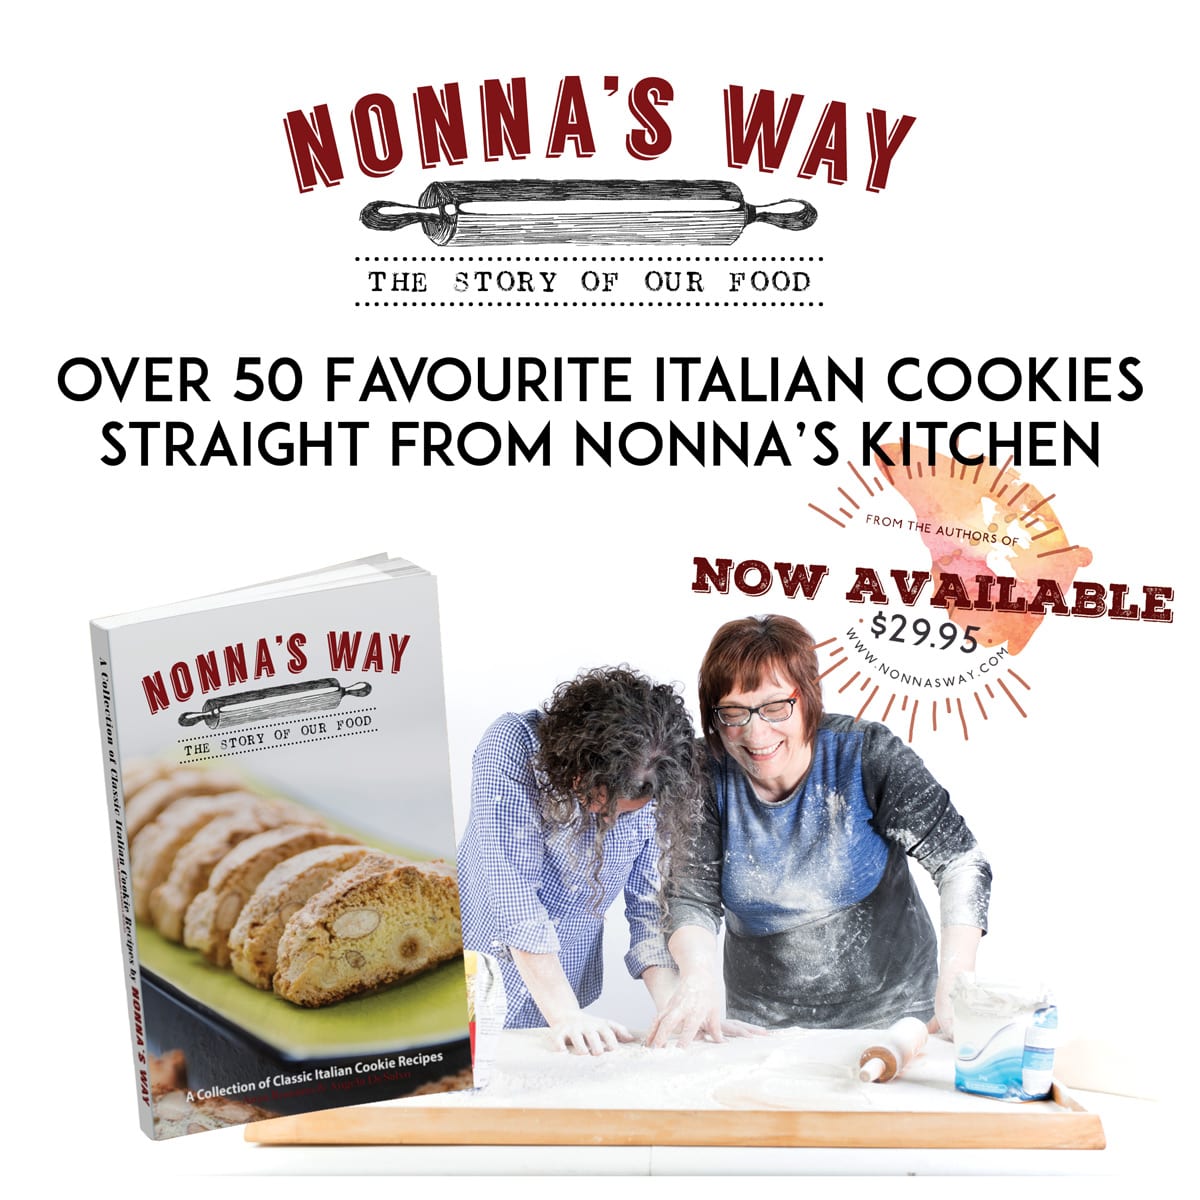 Nonna's Way cookie recipe book now available